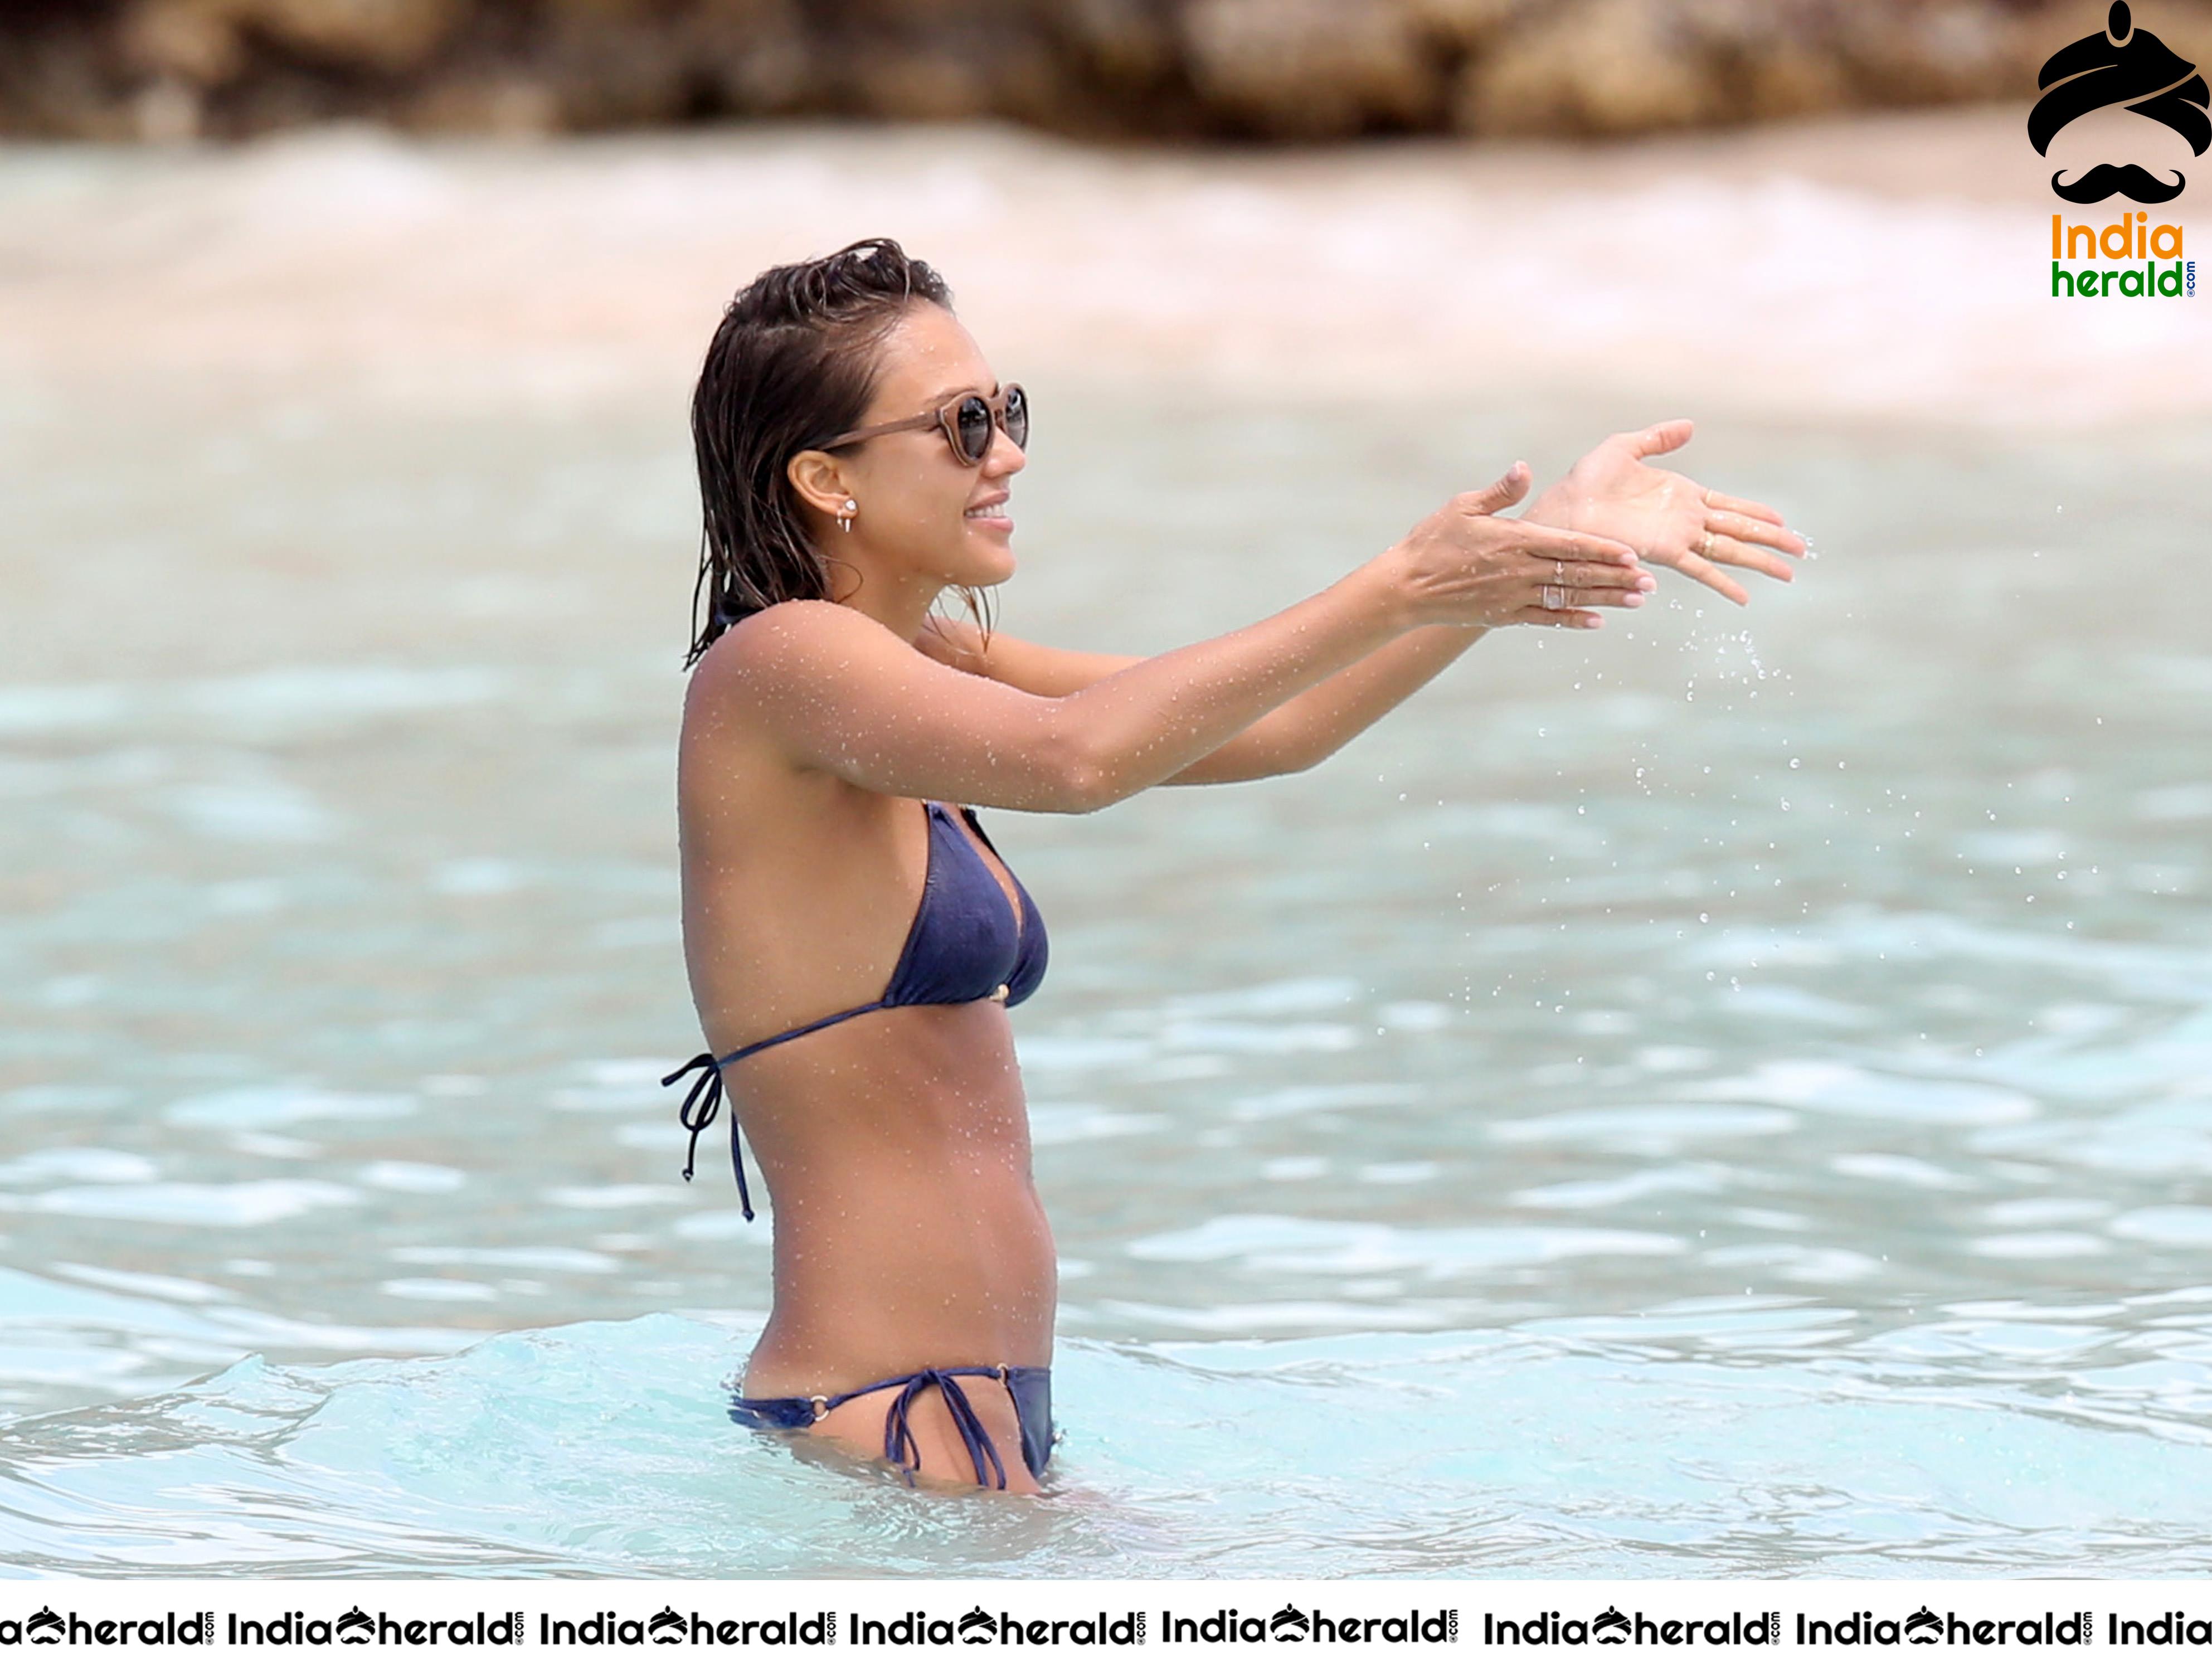 38 Year Old Jessica Alba Spotted In Thin Lace Bikini As Gets Ready For Scuba Diving Set 2